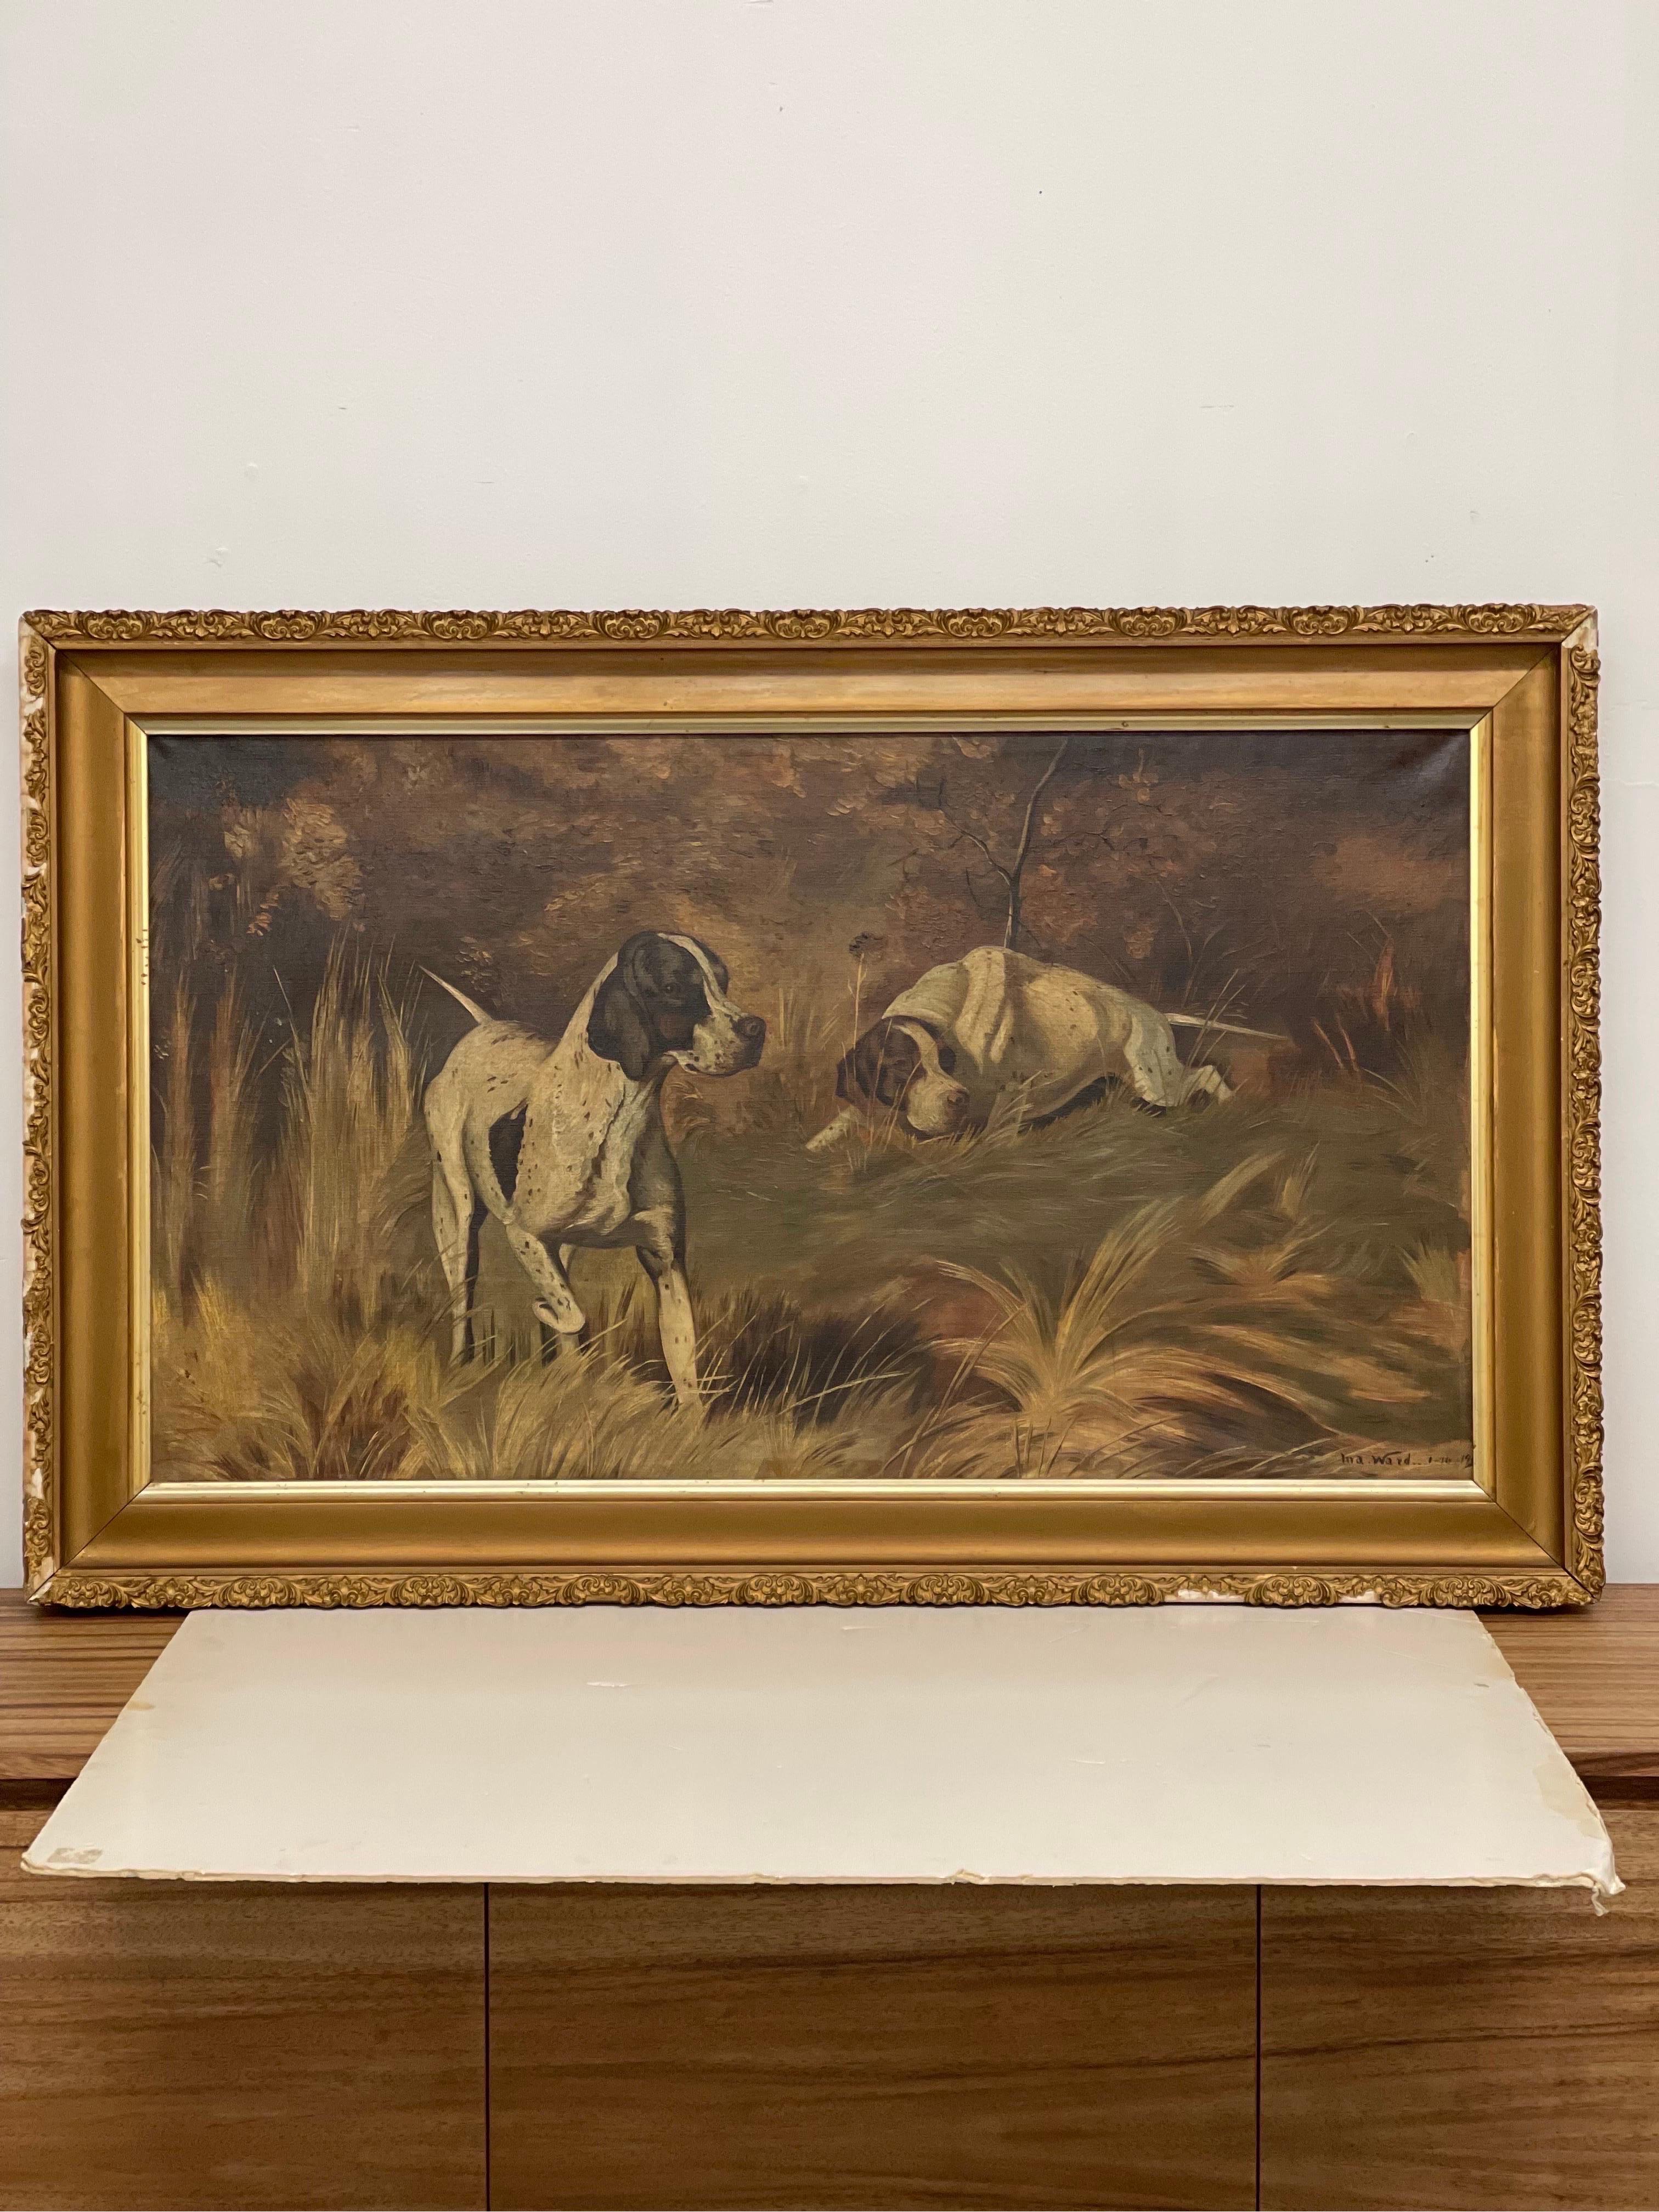 Vintage framed signed painting of serene scene with bloodhounds on canvas

Dimensions. 41 W ; 3 D ; 25 1/2 H.